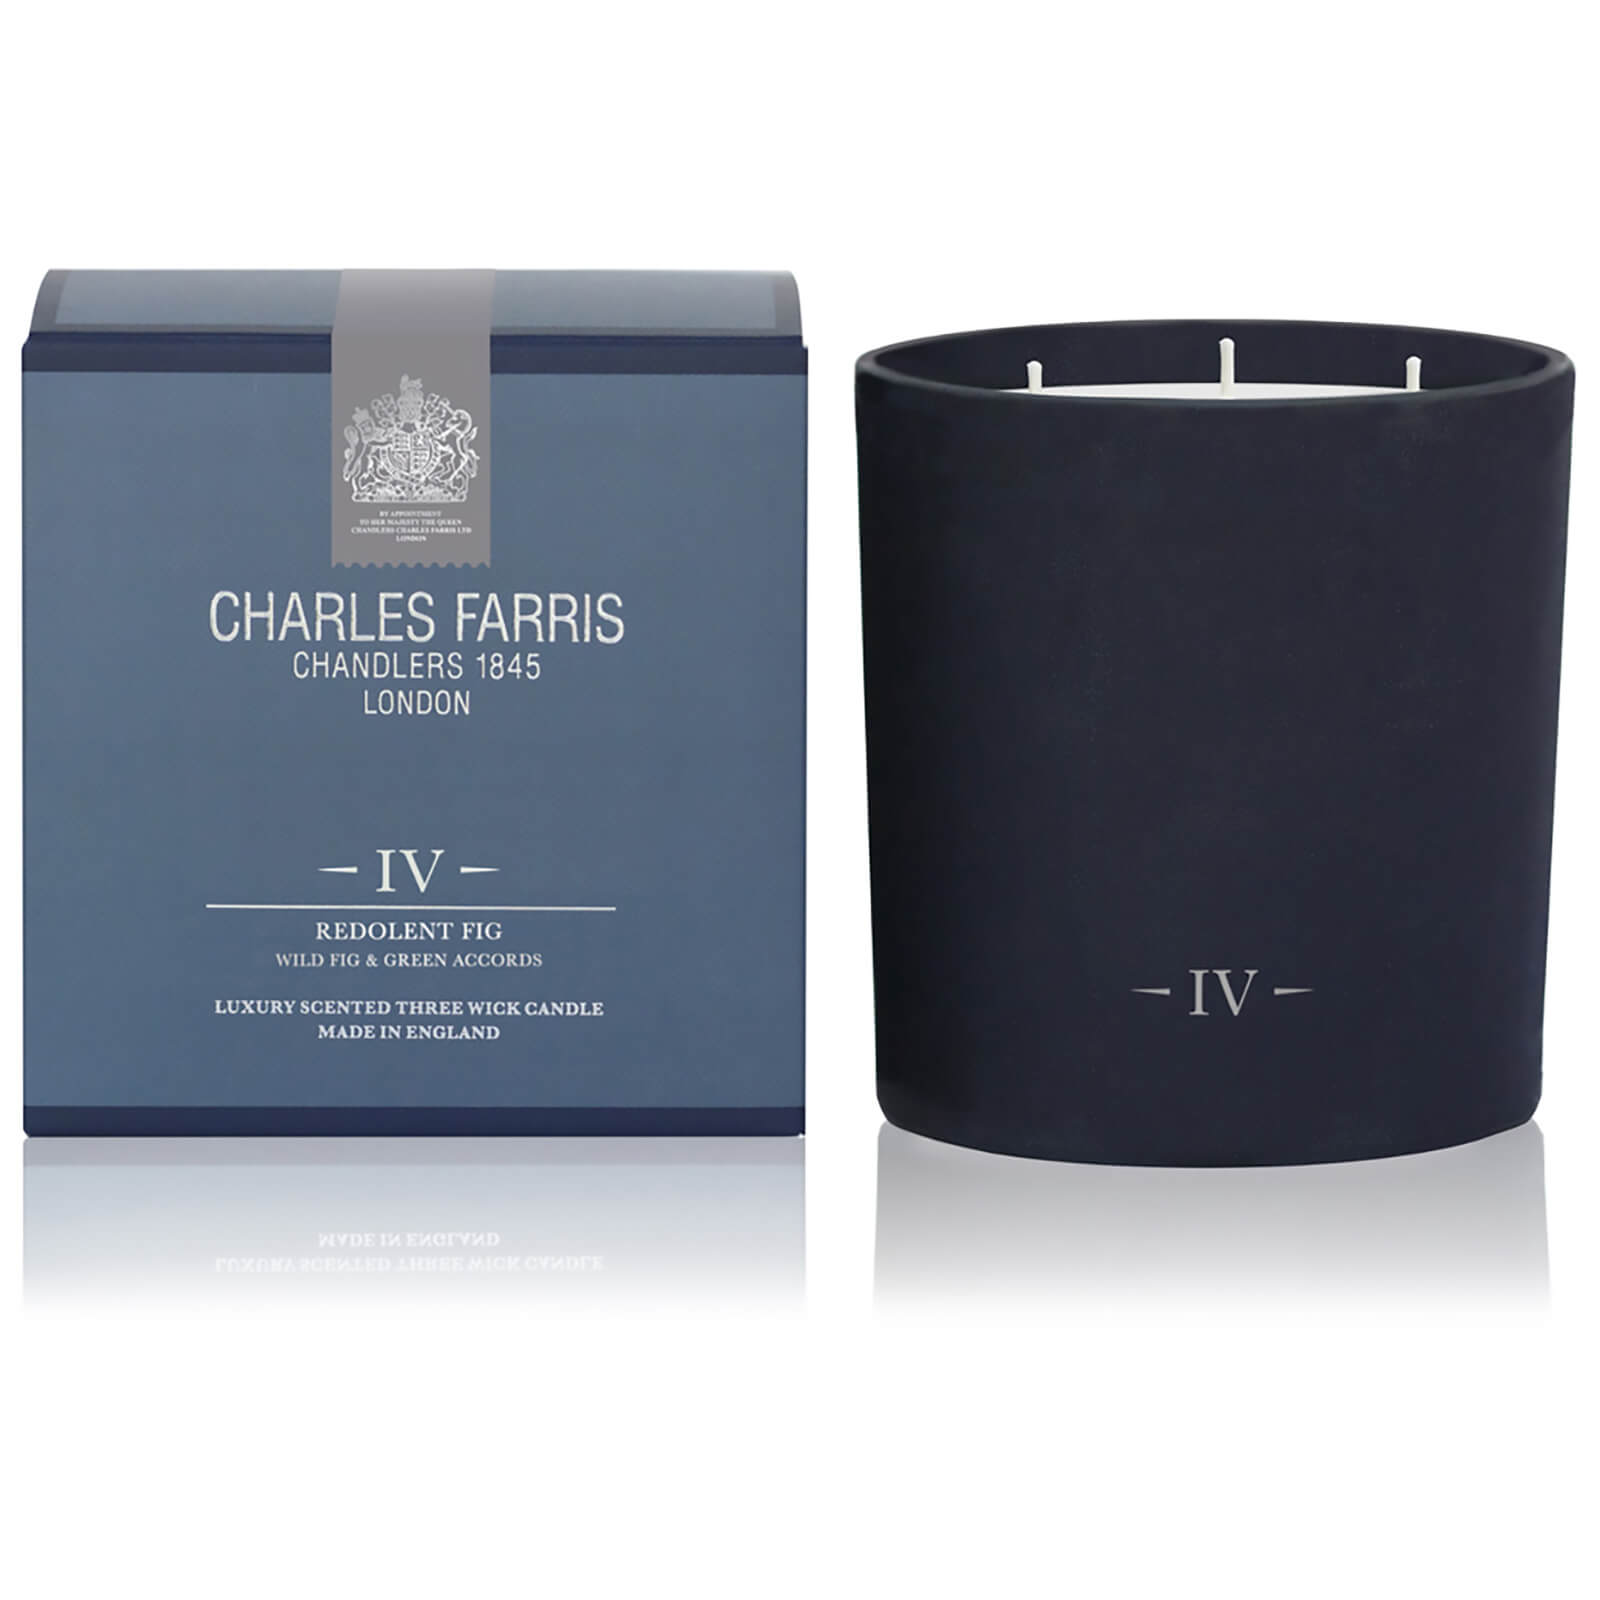 Charles Farris Signature Redolent Fig 3 Wick Candle 640g